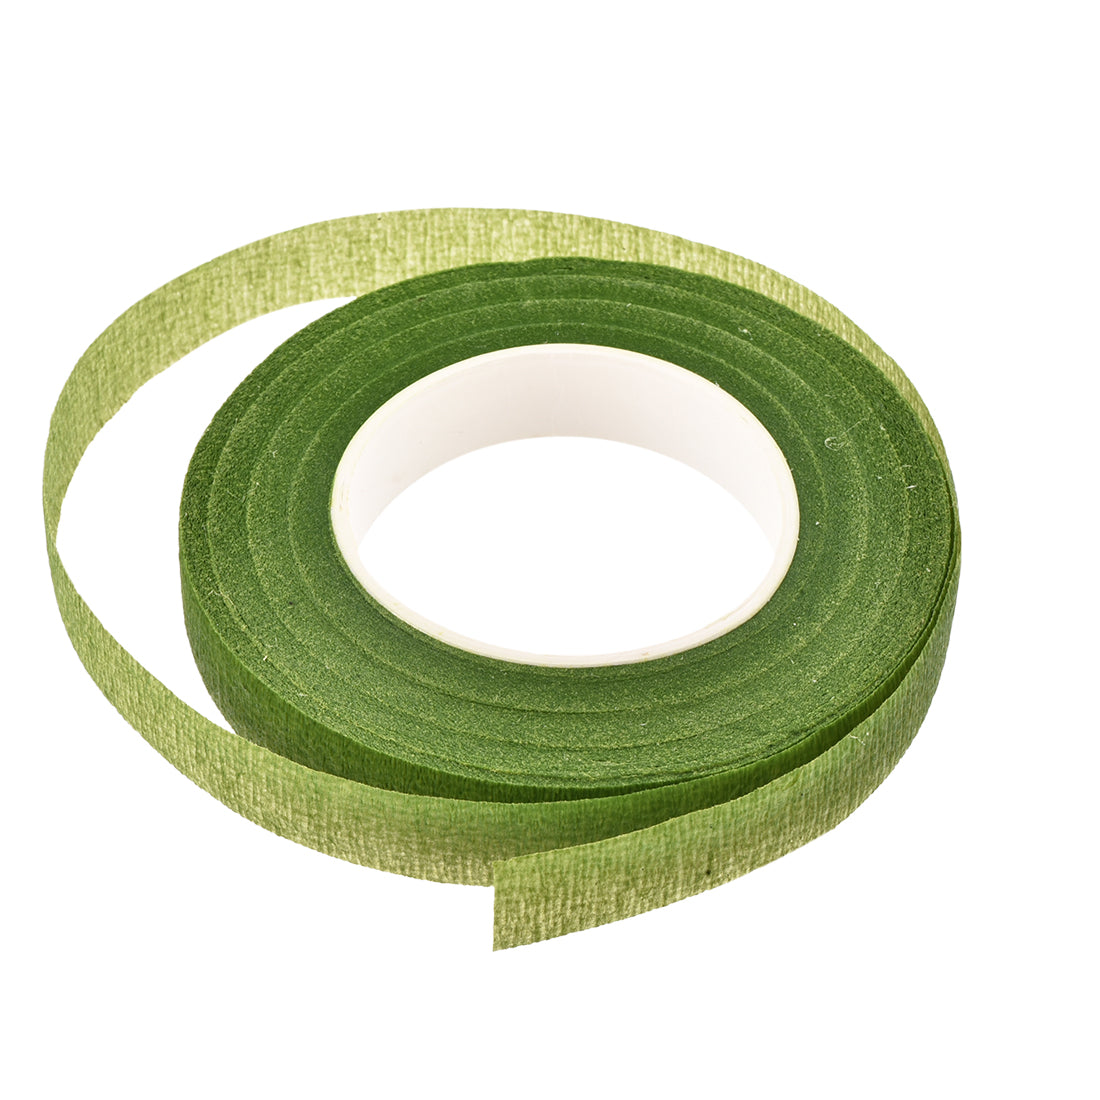 uxcell Uxcell 2Roll 1/2"x30Yard Light Green Floral Tape Flower Adhesives Floral Arrangement